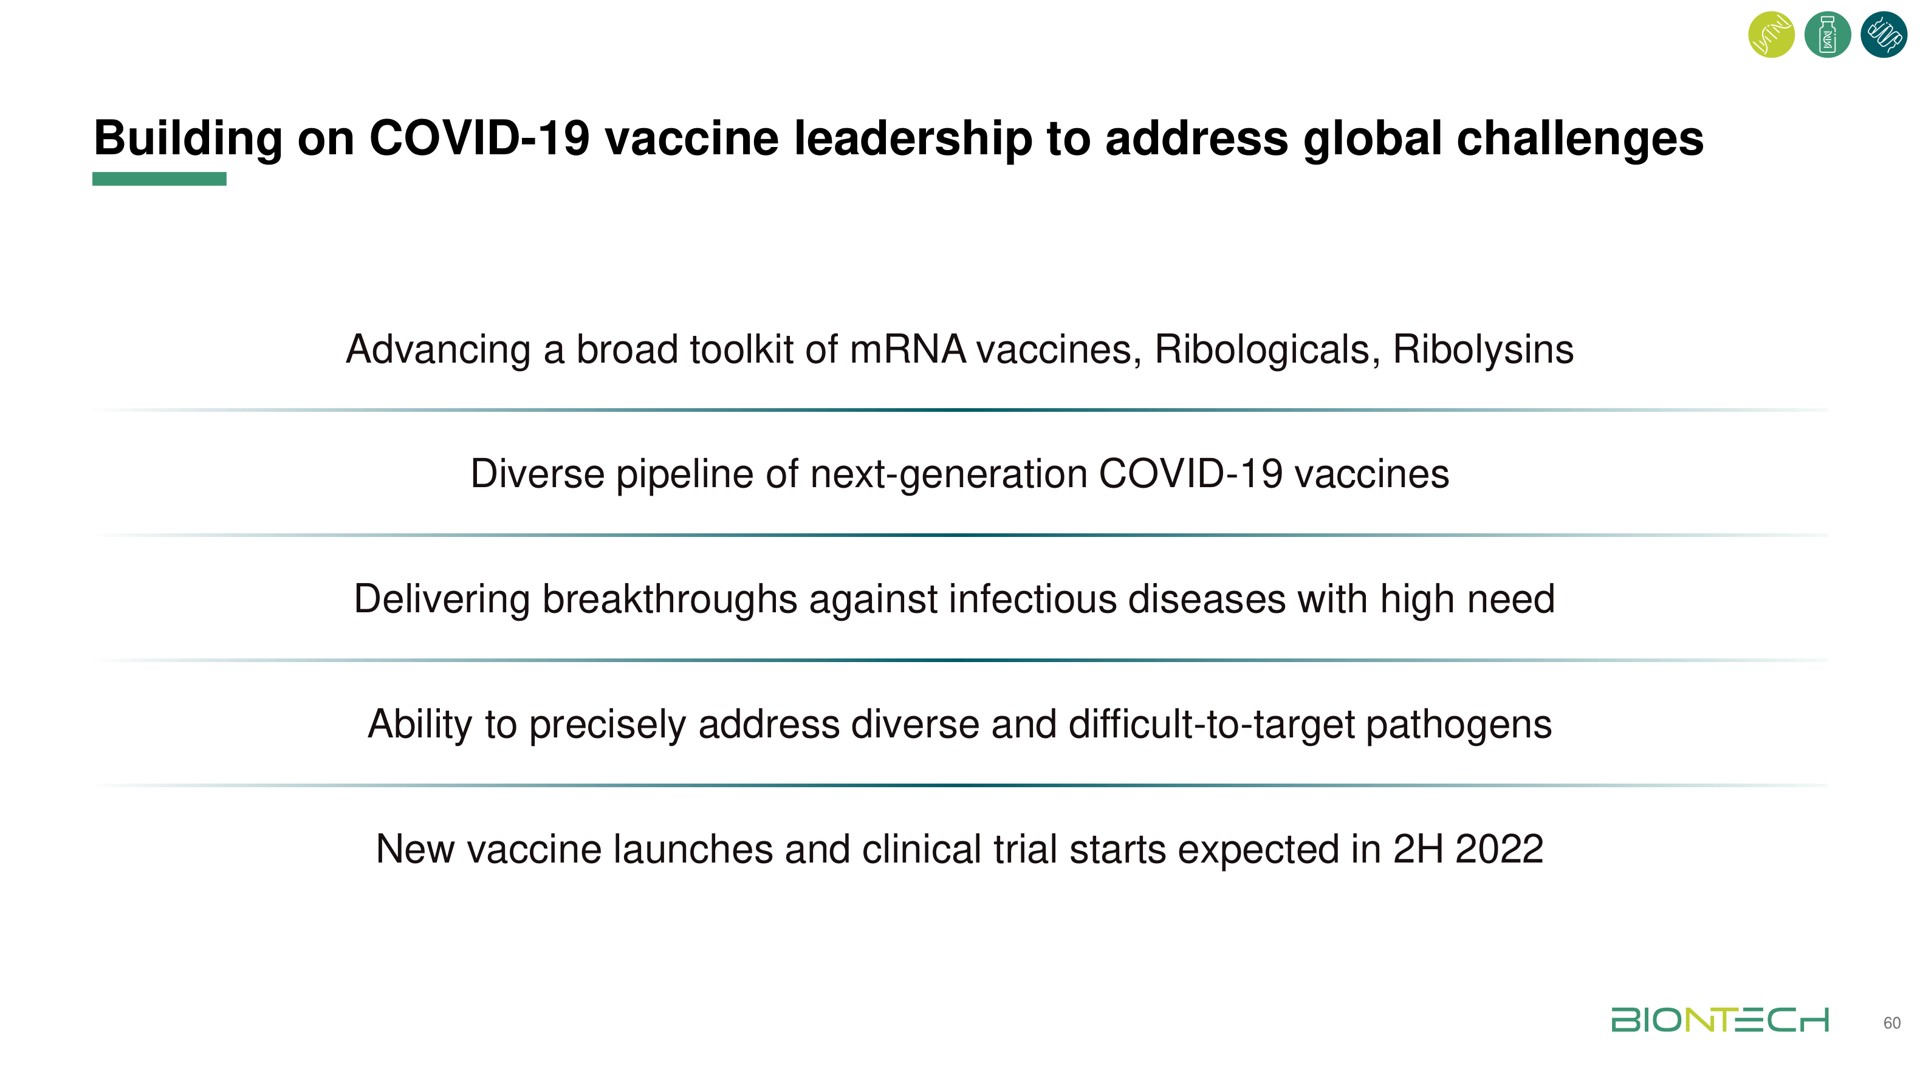 building on covid vaccine leadership to address global challenges | BioNTech